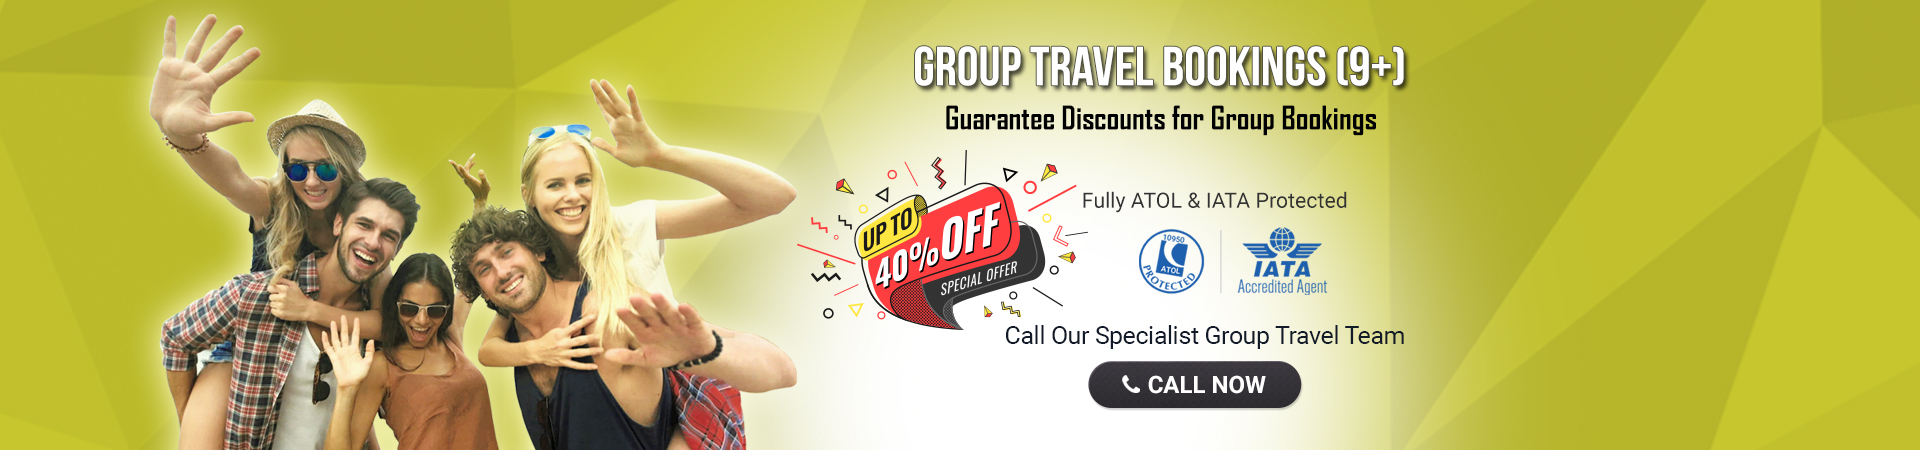 Group Travel Booking